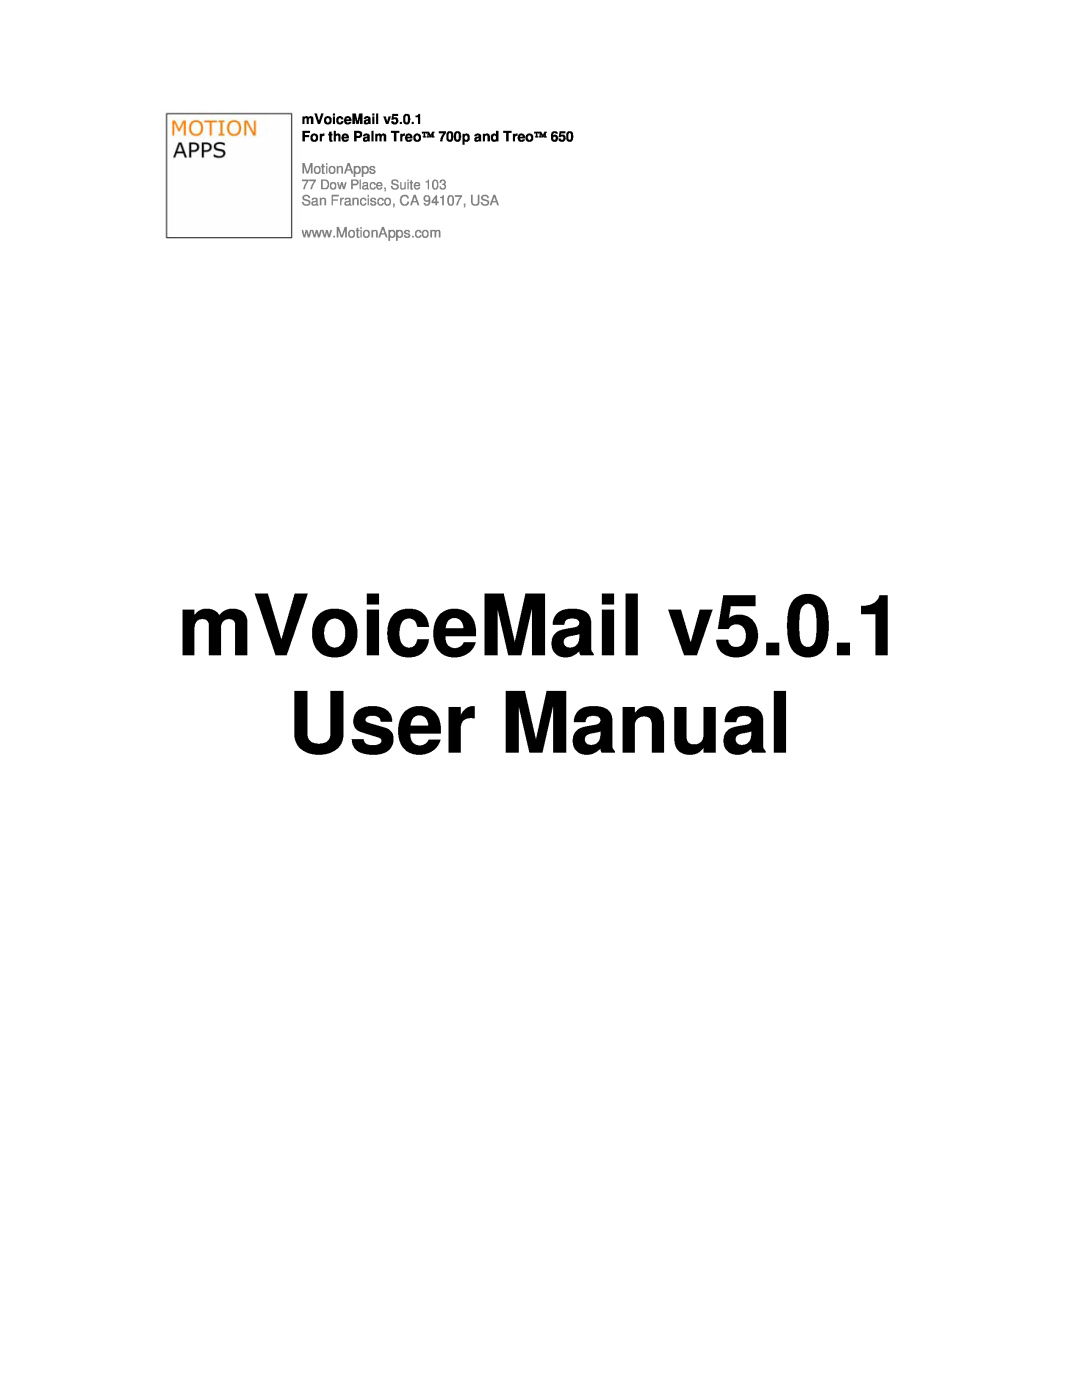 Motorola motorola user manual mVoiceMail For the Palm Treo 700p and Treo, MotionApps, Dow Place, Suite 